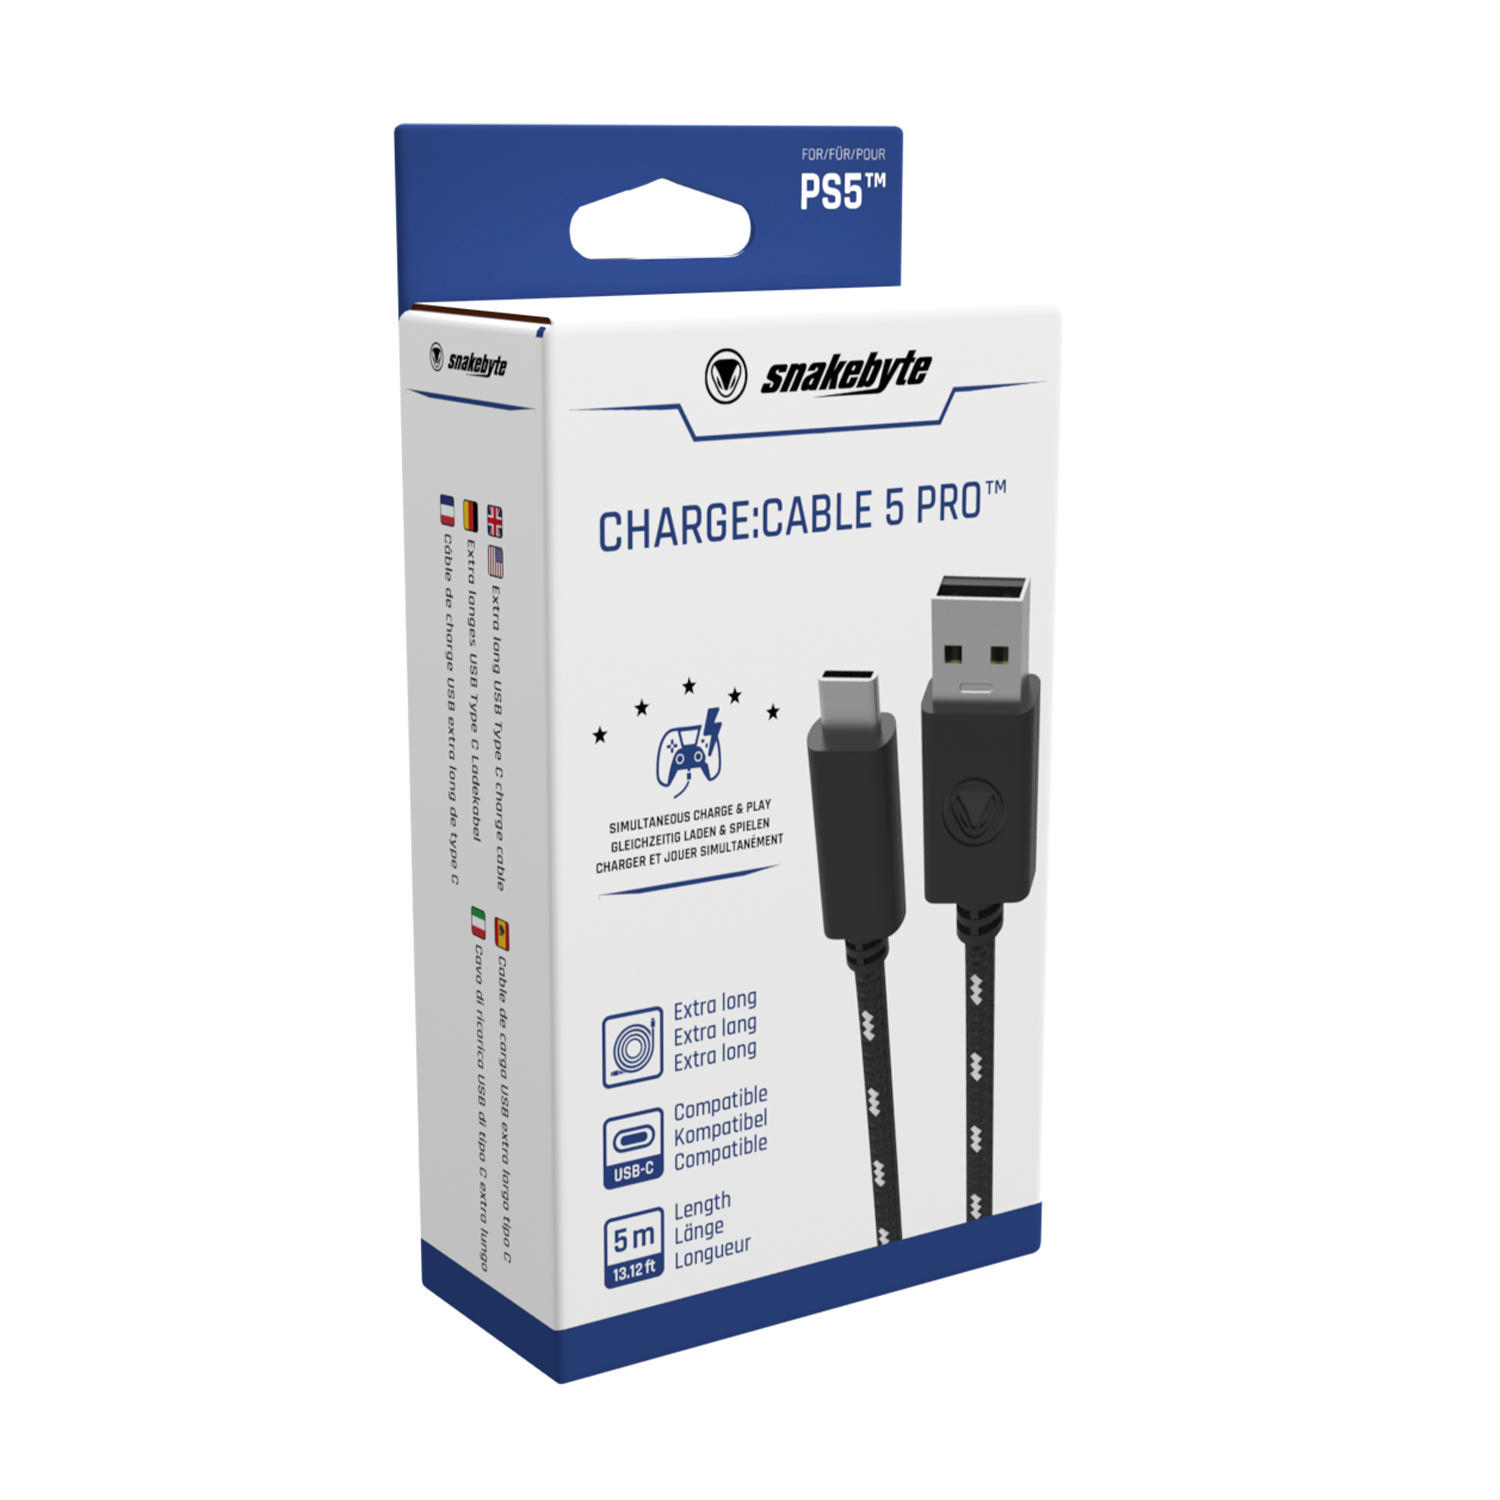 USB Cable PRO™ 5 Charge: 2.0 Schwarz/Weiß (5m) Ladekabel, PS5 SNAKEBYTE